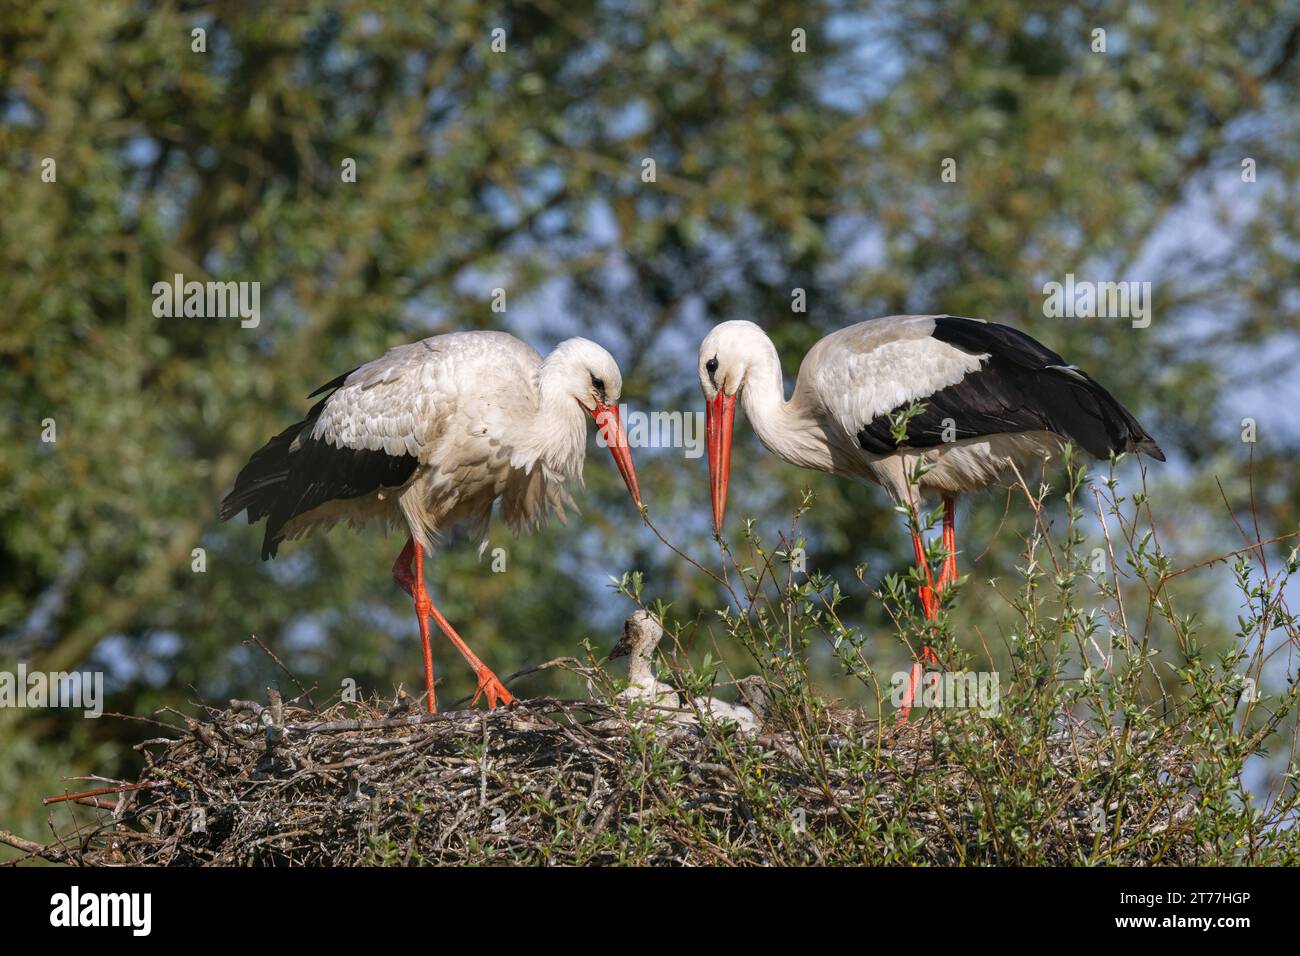 white stork (Ciconia ciconia), stork family in the nest, side view, Netherlands, Overijssel, Weerribben-Wieden National Park Stock Photo